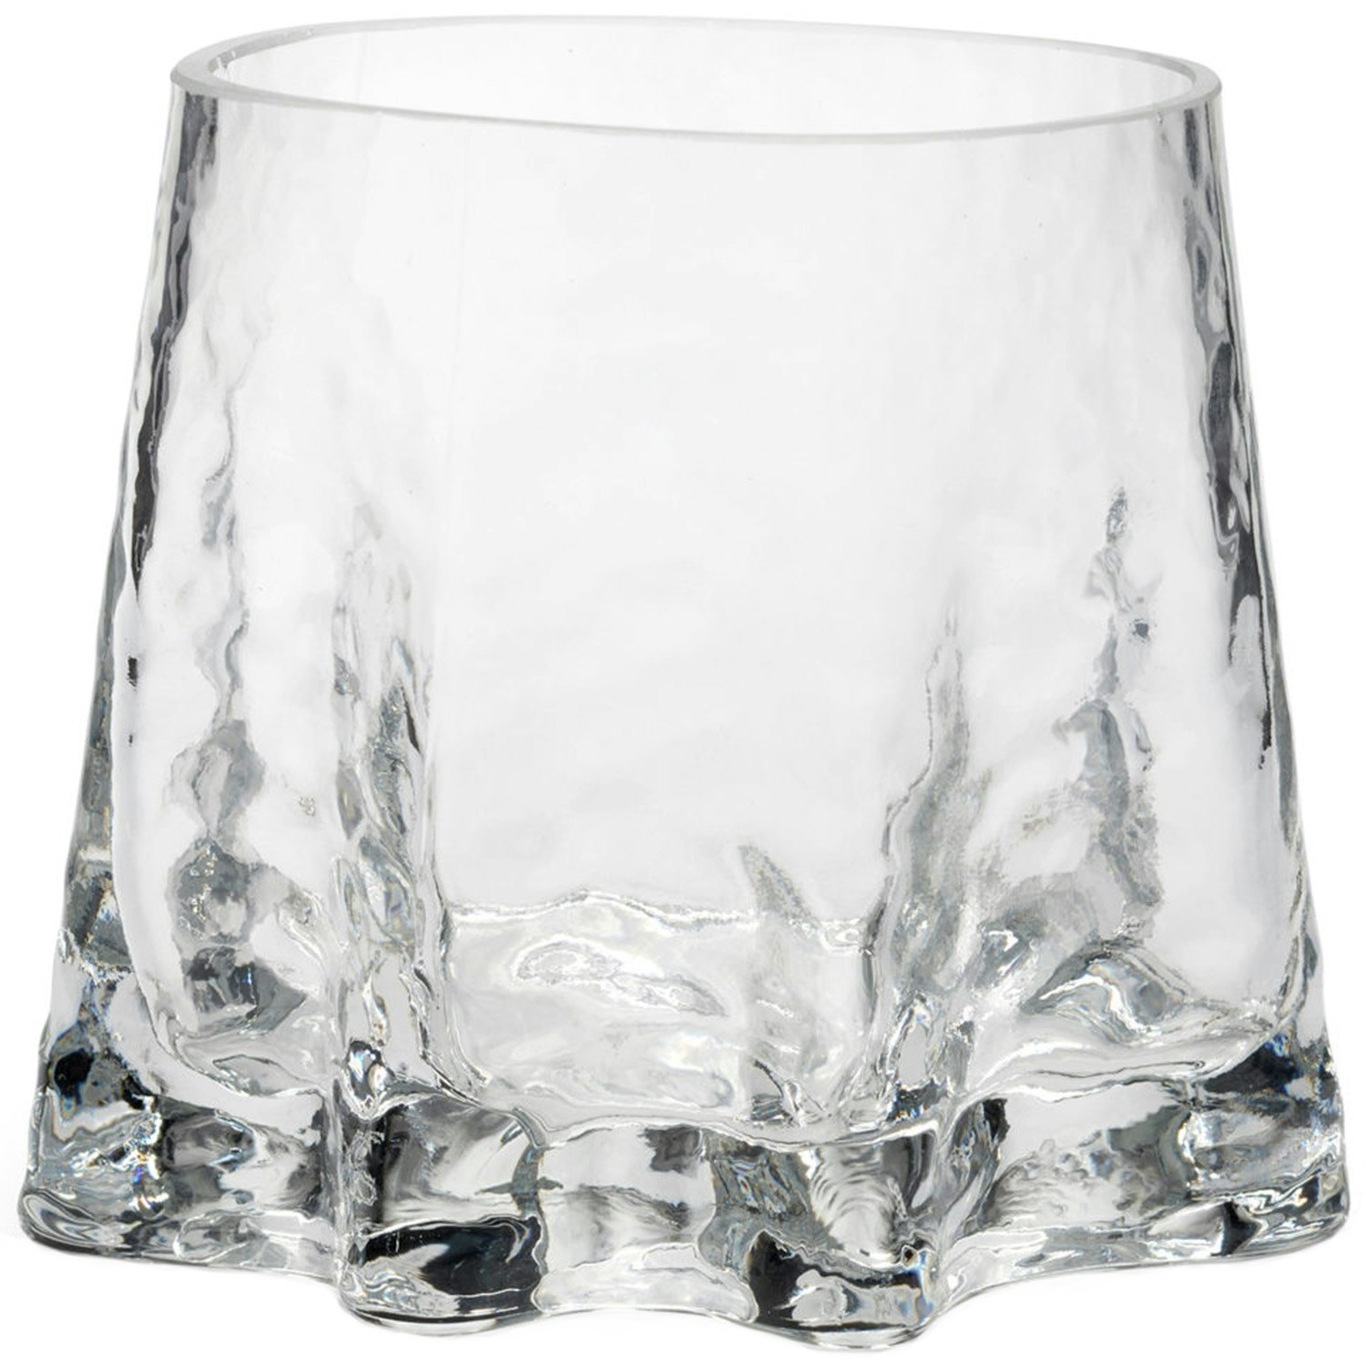 Gry Candle Holder Medium, Clear